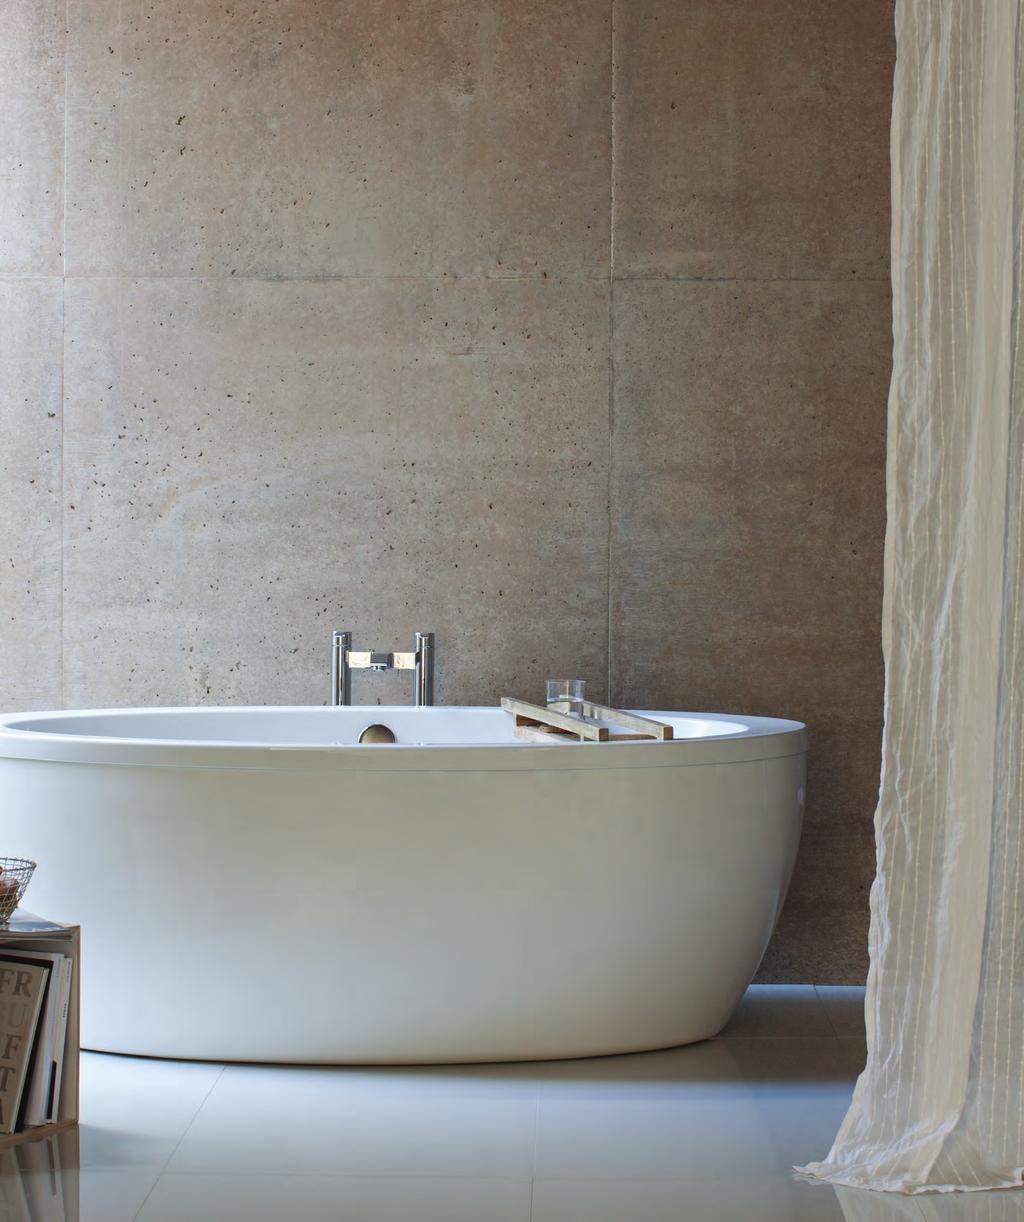 FREEFUERTE A sumptuous, oval shaped free-standing two piece bath with surround which will act as an eye-catching centre-piece to any contemporary